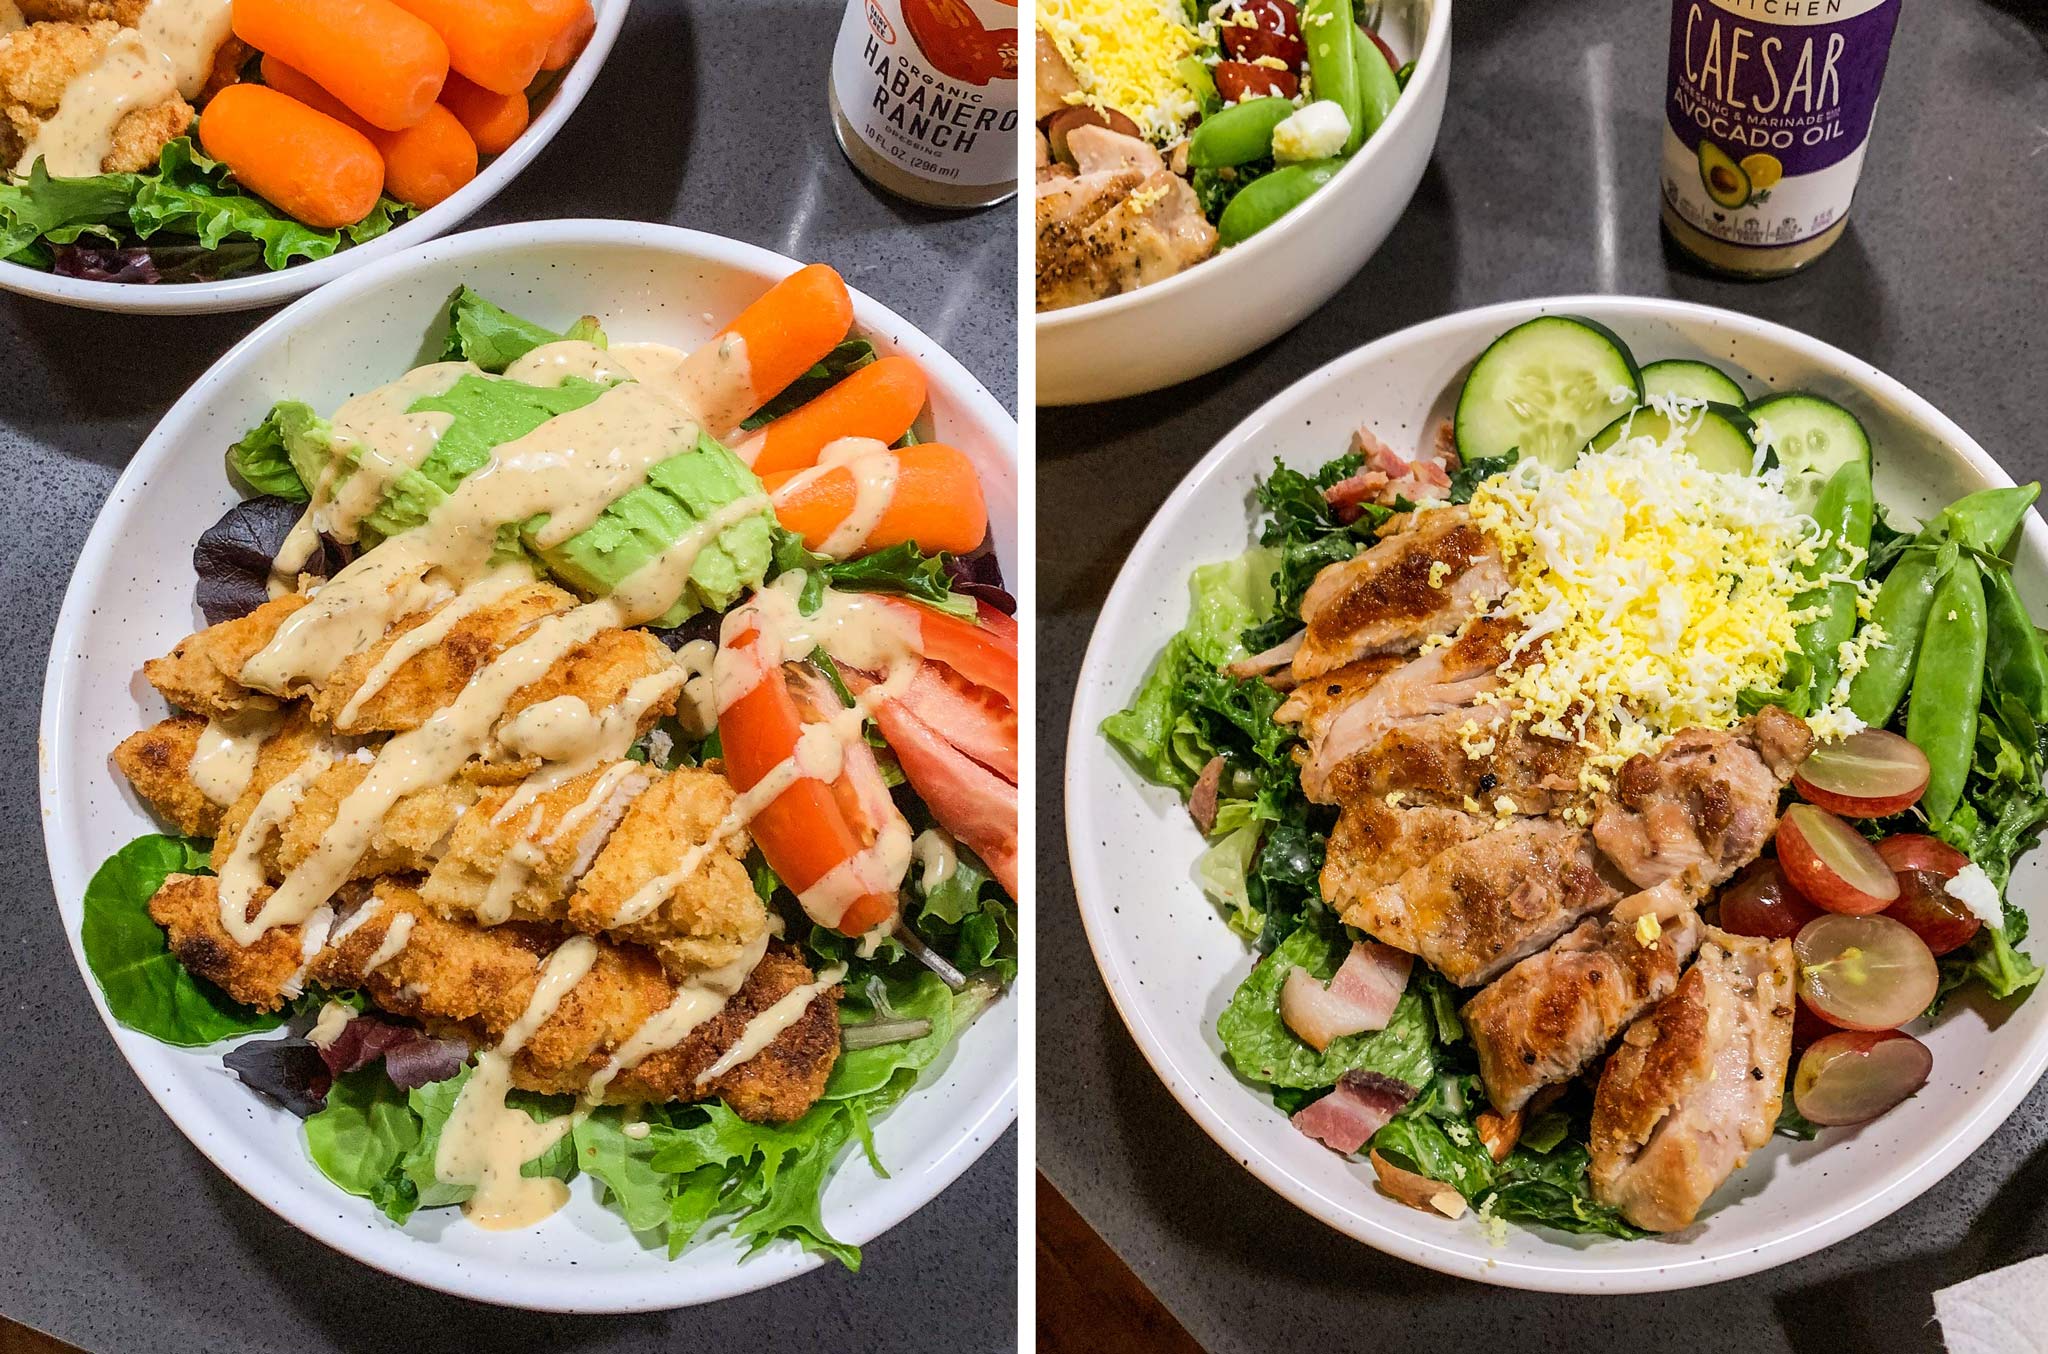 Examples of B.A.S. Big ass salads with mixed greens, lots of veggies, protein, and dressing